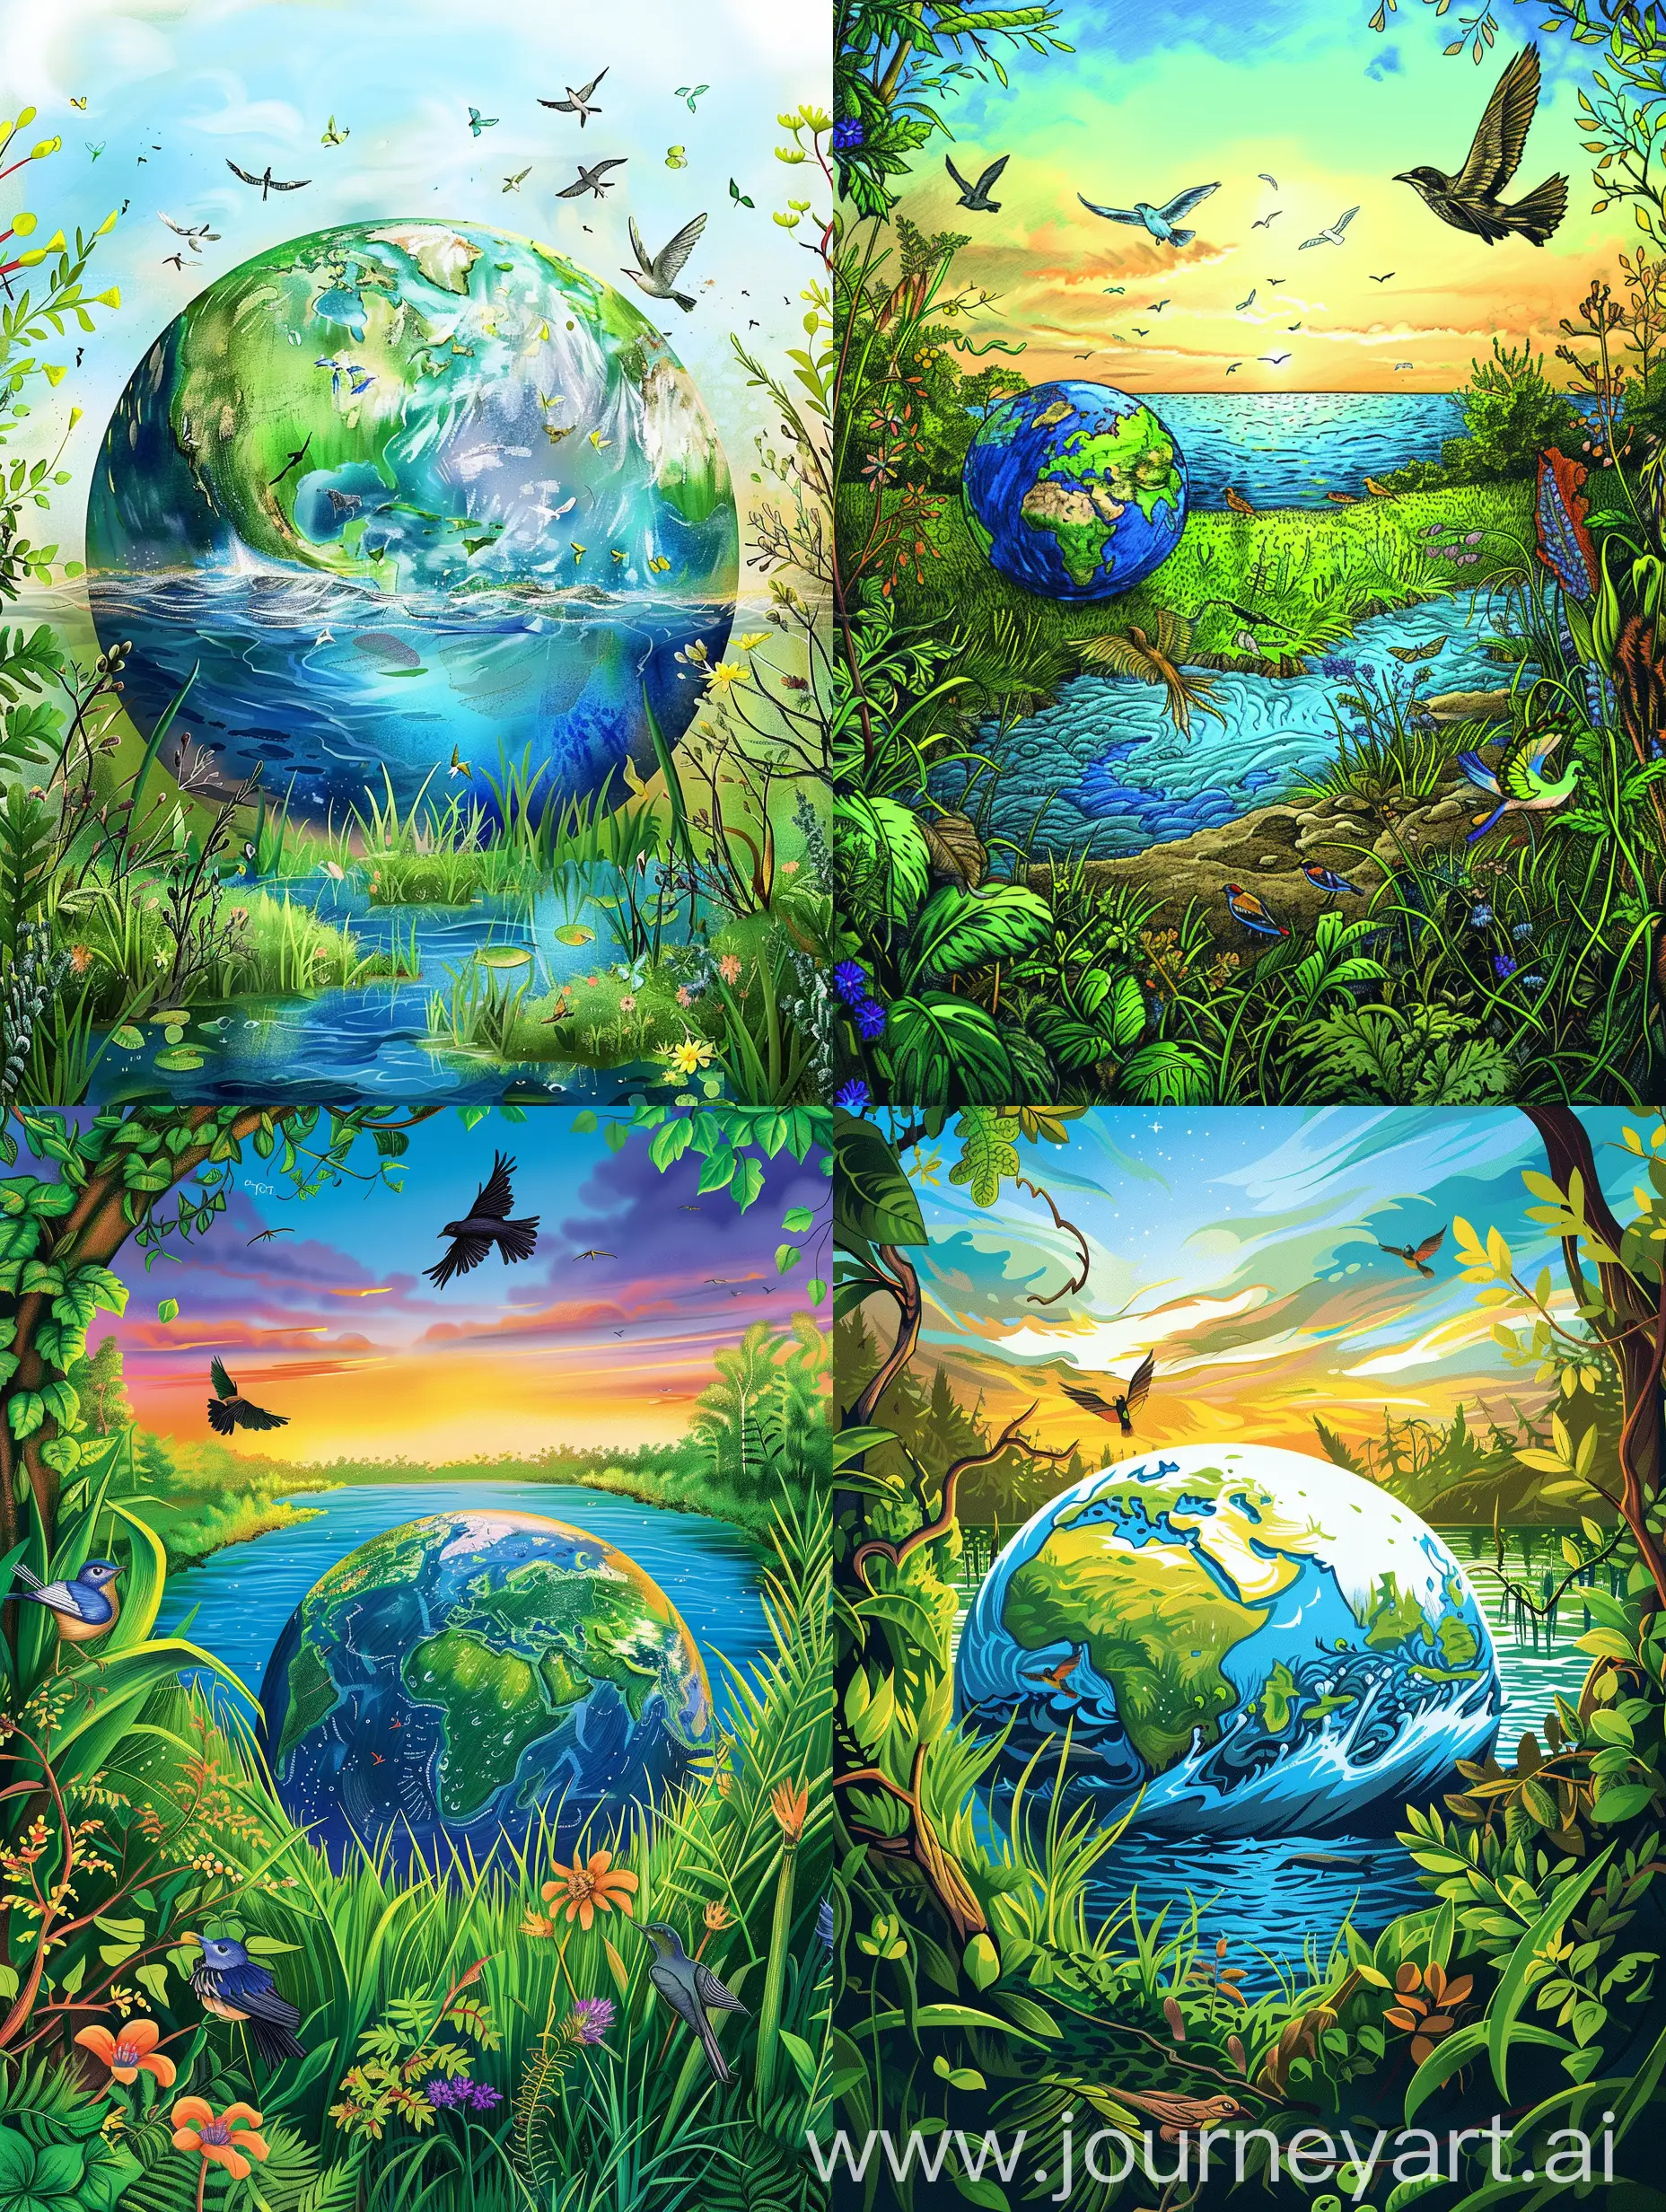 Please draw a picture of the vibrant nature, with the Earth, water, green grasslands and plants, and birds